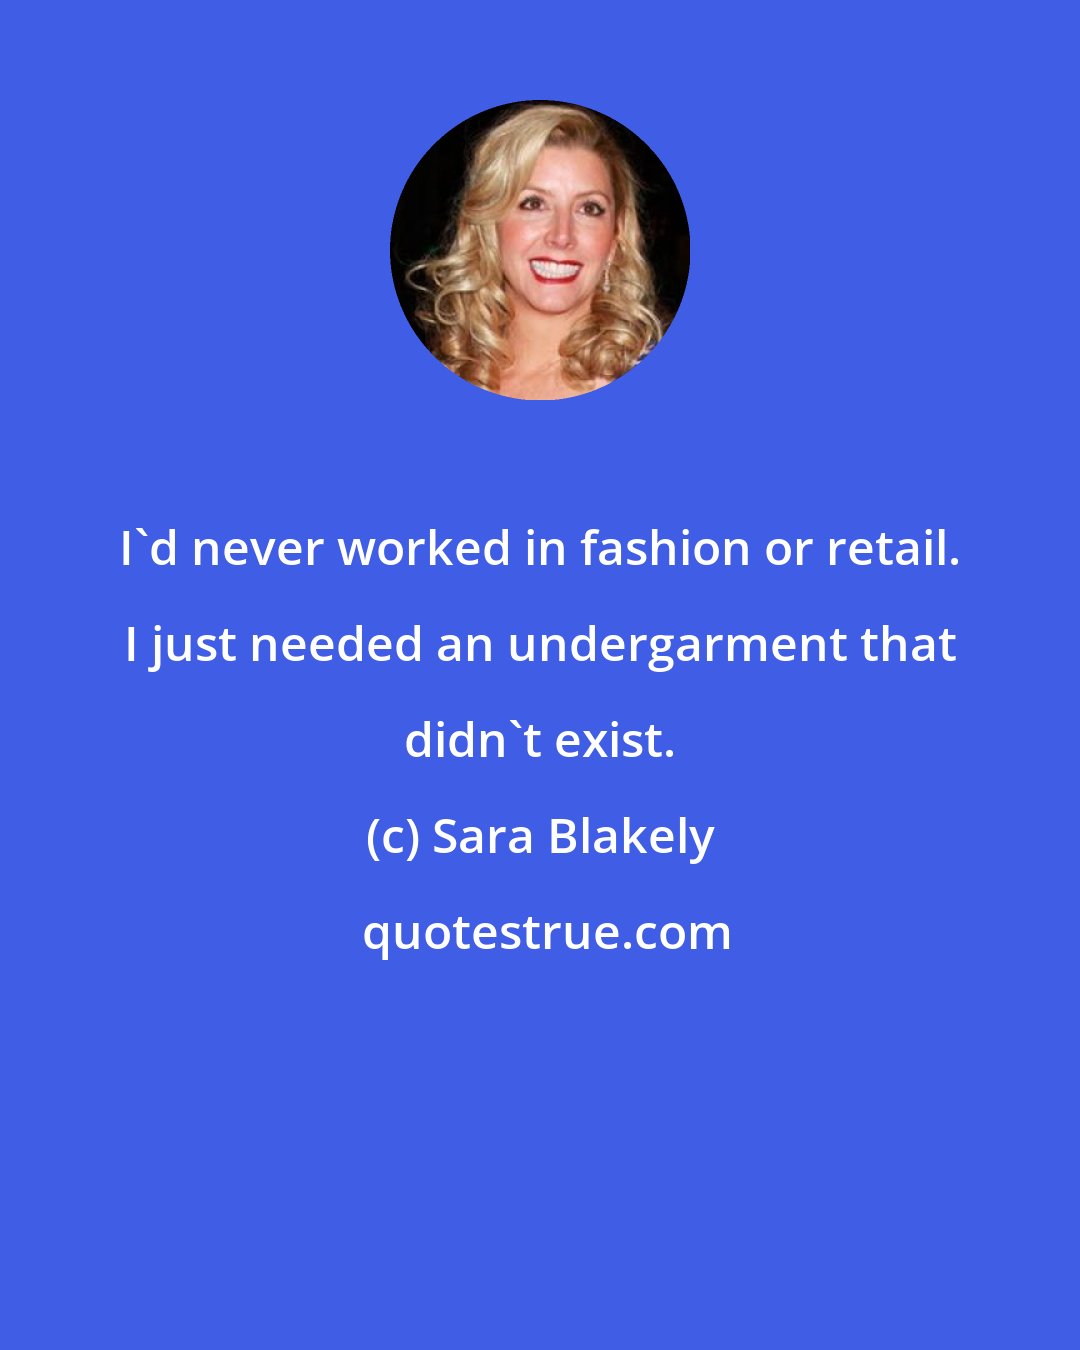 Sara Blakely: I'd never worked in fashion or retail. I just needed an undergarment that didn't exist.